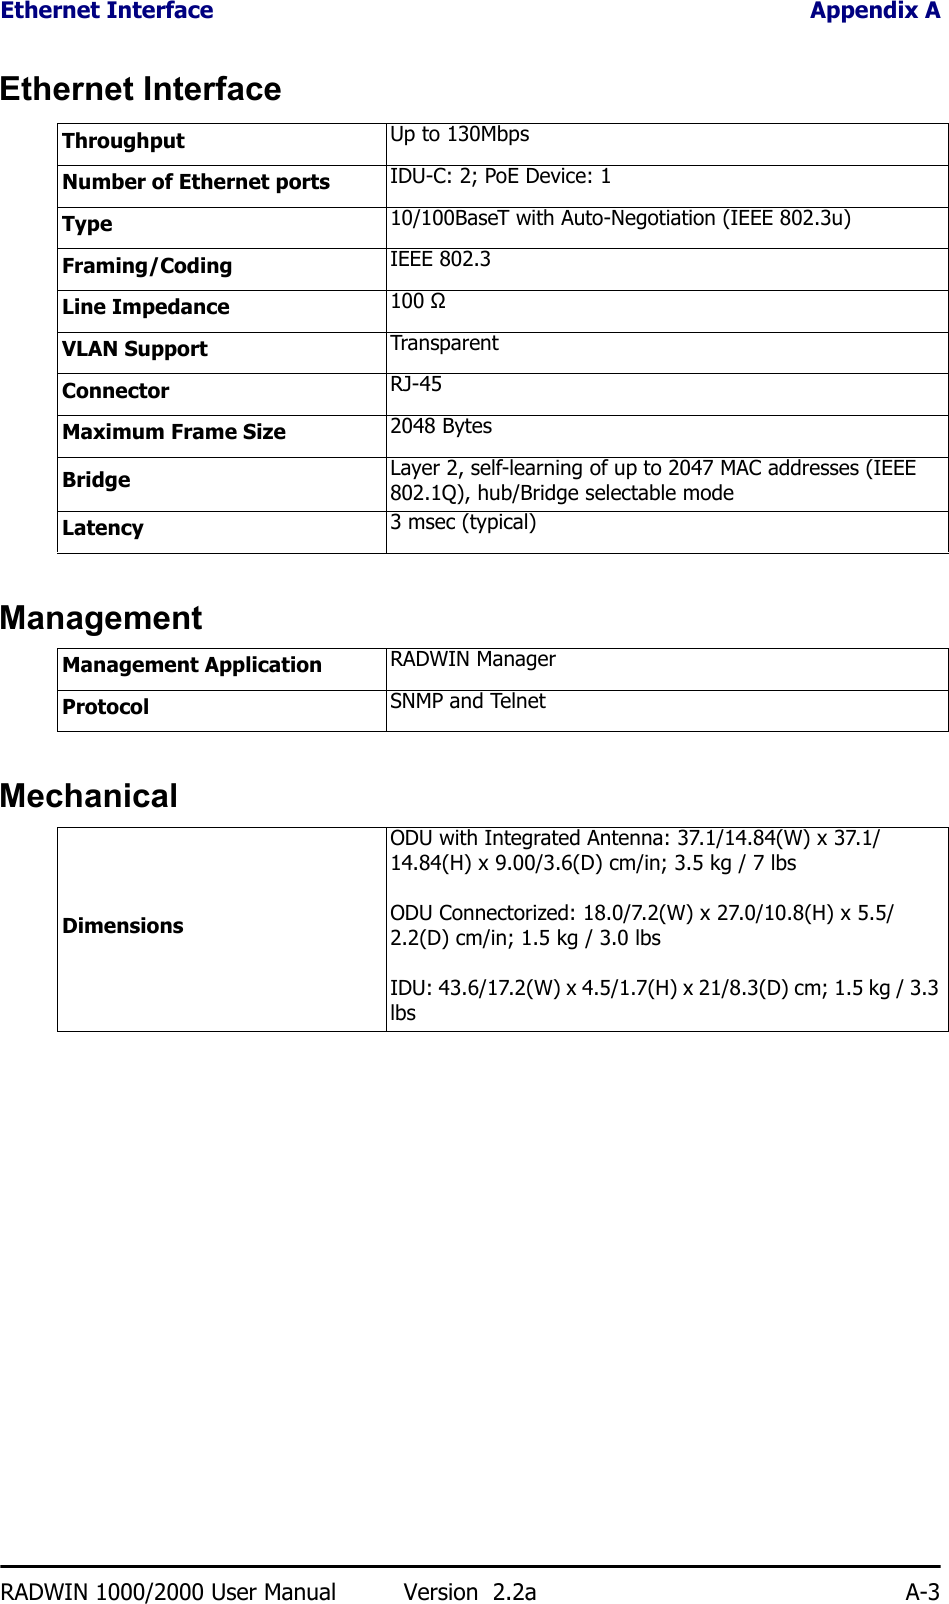 Ethernet Interface Appendix ARADWIN 1000/2000 User Manual Version  2.2a A-3Ethernet InterfaceManagementMechanicalThroughput Up to 130MbpsNumber of Ethernet ports IDU-C: 2; PoE Device: 1Type 10/100BaseT with Auto-Negotiation (IEEE 802.3u)Framing/Coding IEEE 802.3Line Impedance 100 ΩVLAN Support TransparentConnector RJ-45Maximum Frame Size 2048 BytesBridge Layer 2, self-learning of up to 2047 MAC addresses (IEEE 802.1Q), hub/Bridge selectable modeLatency 3 msec (typical)Management Application RADWIN ManagerProtocol SNMP and TelnetDimensionsODU with Integrated Antenna: 37.1/14.84(W) x 37.1/14.84(H) x 9.00/3.6(D) cm/in; 3.5 kg / 7 lbsODU Connectorized: 18.0/7.2(W) x 27.0/10.8(H) x 5.5/2.2(D) cm/in; 1.5 kg / 3.0 lbsIDU: 43.6/17.2(W) x 4.5/1.7(H) x 21/8.3(D) cm; 1.5 kg / 3.3 lbs